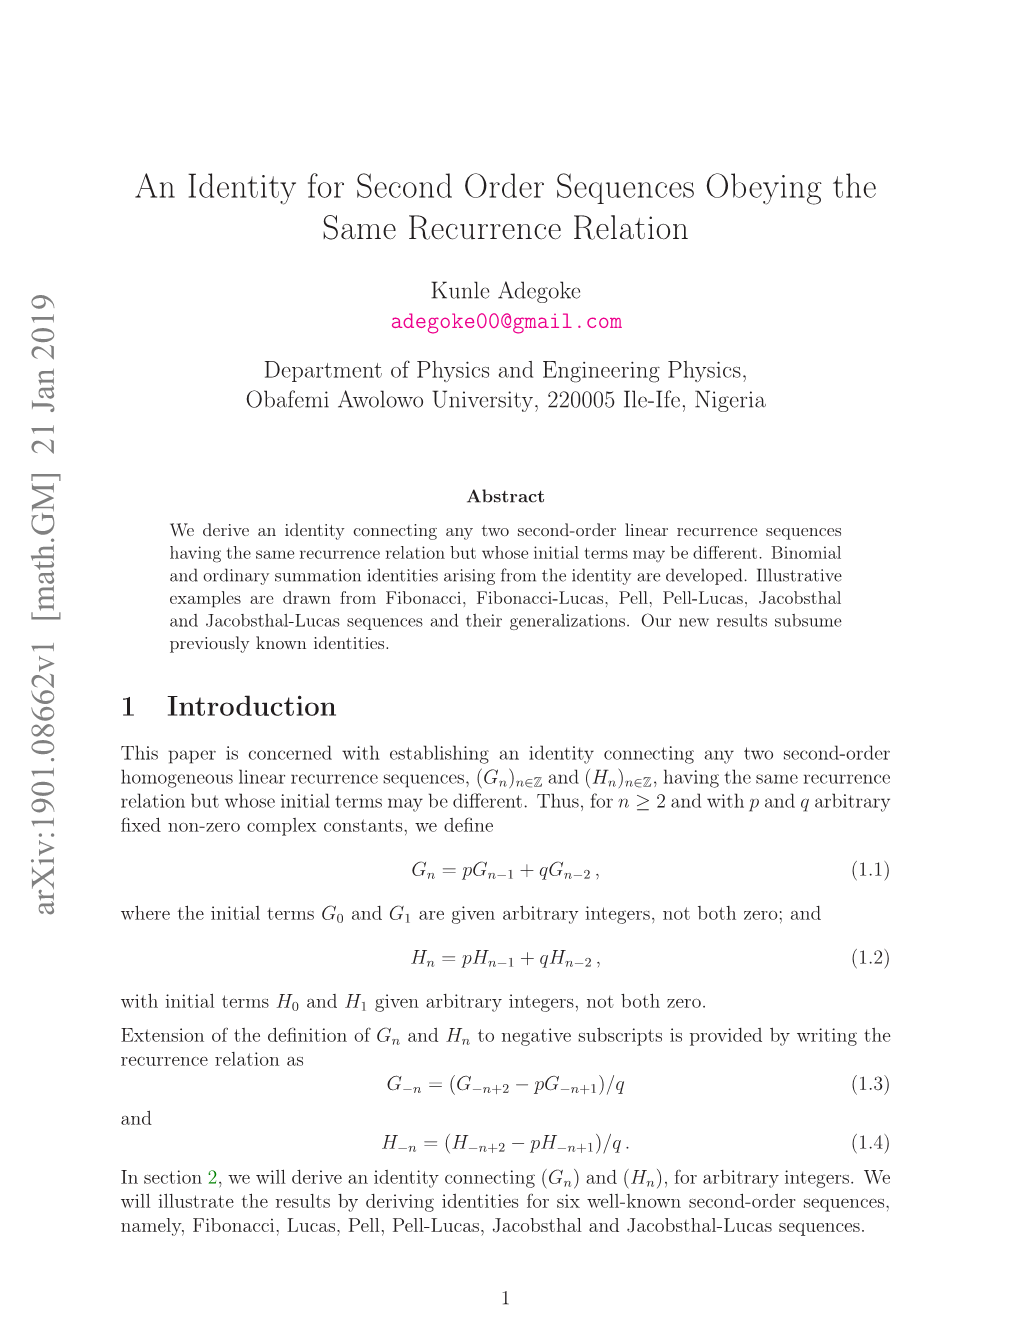 An Identity for Second Order Sequences Obeying the Same